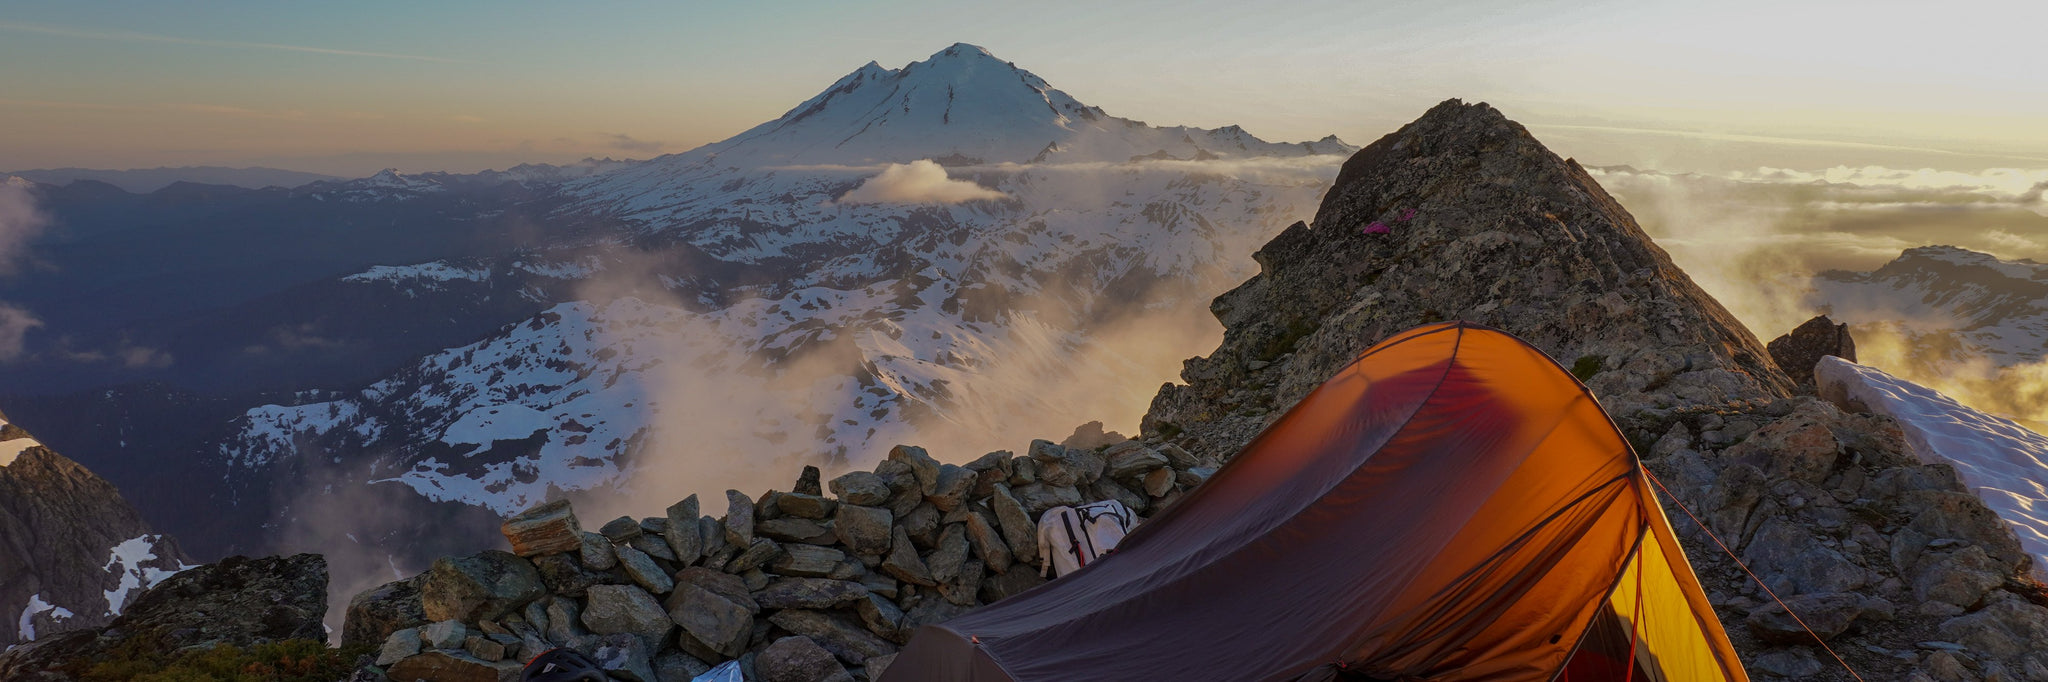 Sunset view of Mount Baker at Winnie's Slide Bivy on the Fisher Chimneys Route of Mount Shuksan